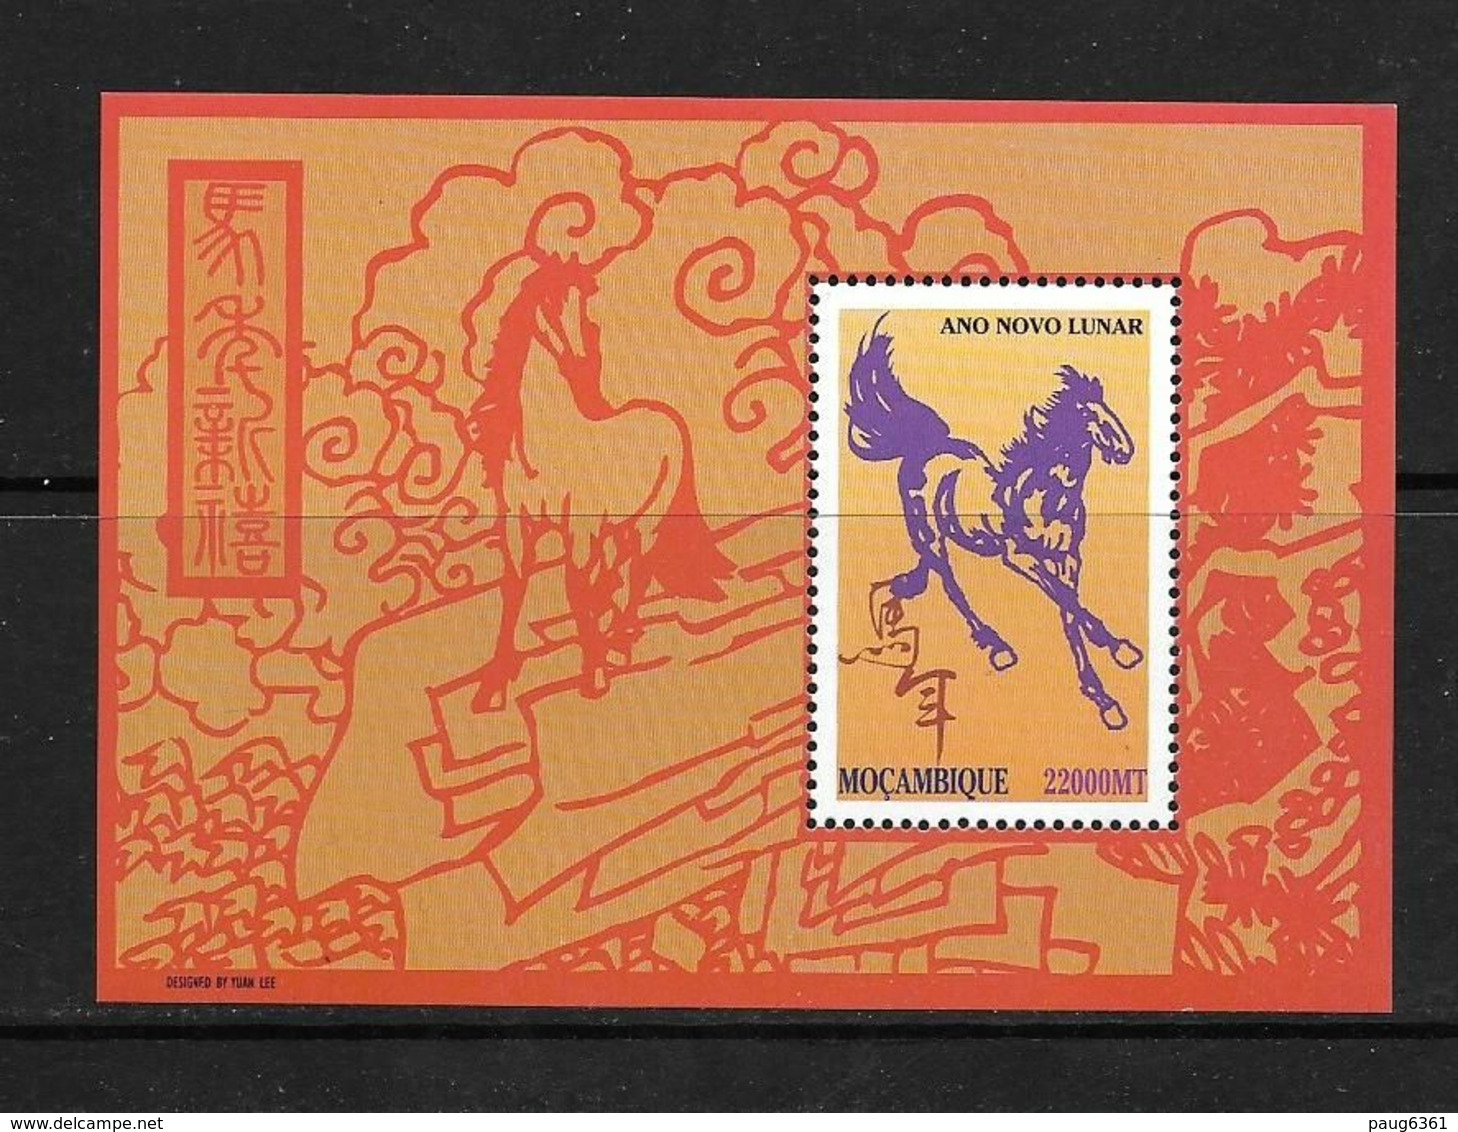 MOZAMBIQUE 2002 ANNEE DU CHEVAL  YVERT N°B71  NEUF MNH** - Chinese New Year